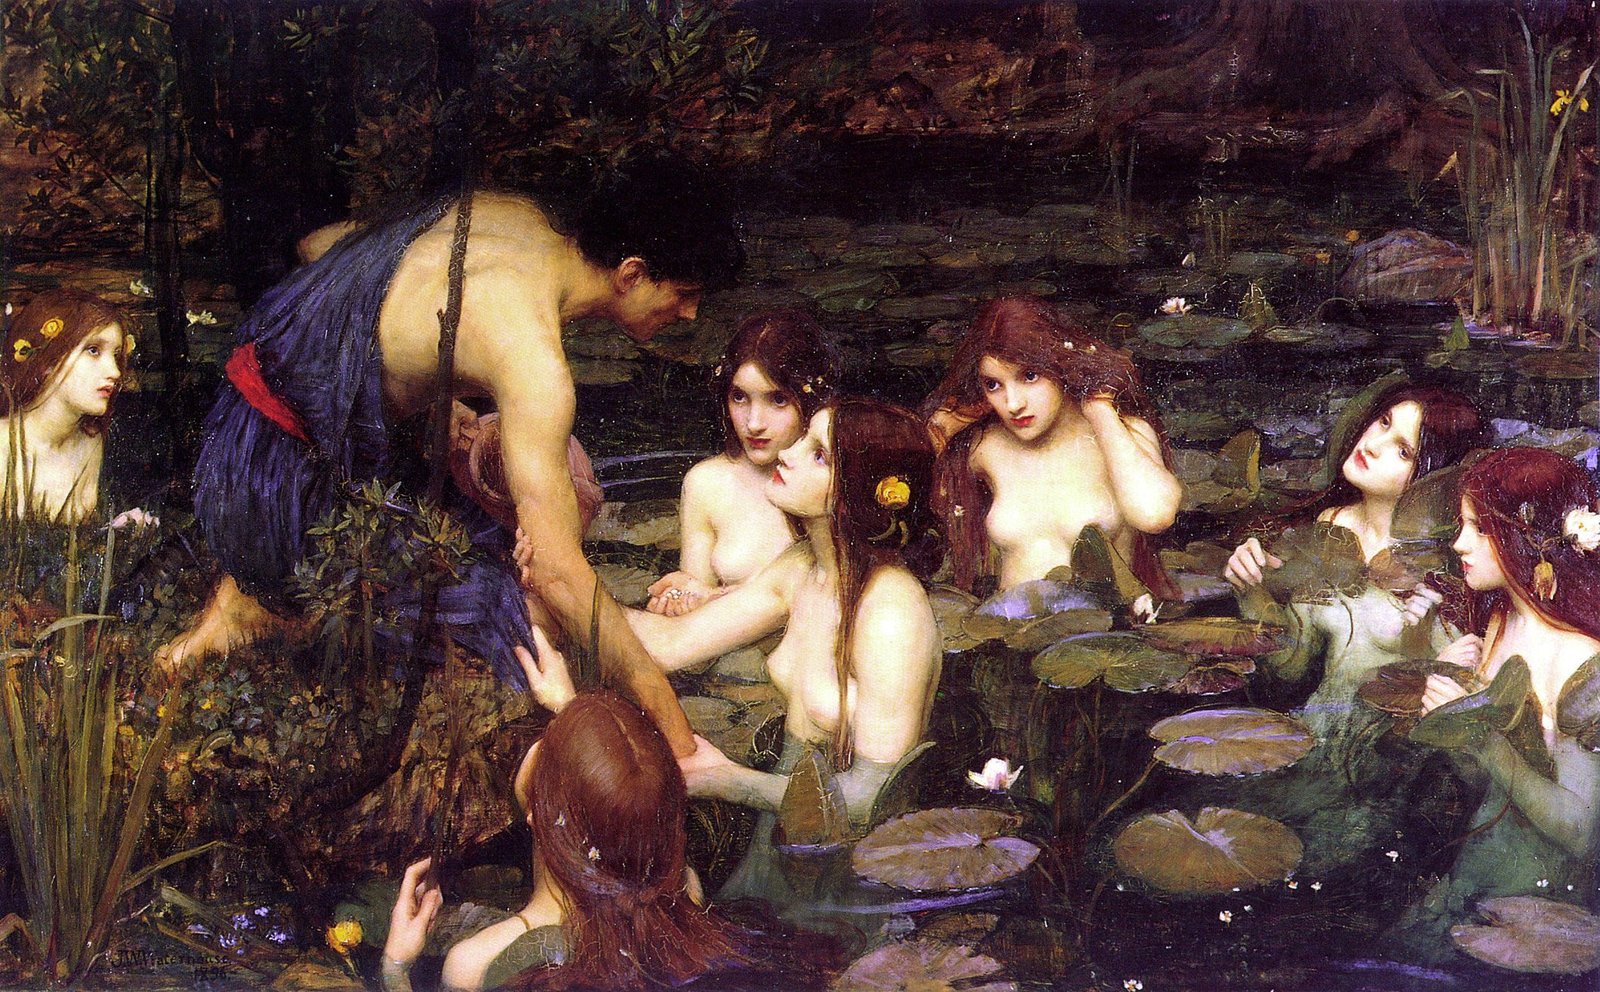 Hylas and the Nymphs” by John William Waterhouse: Mythical Beauty Unveiled